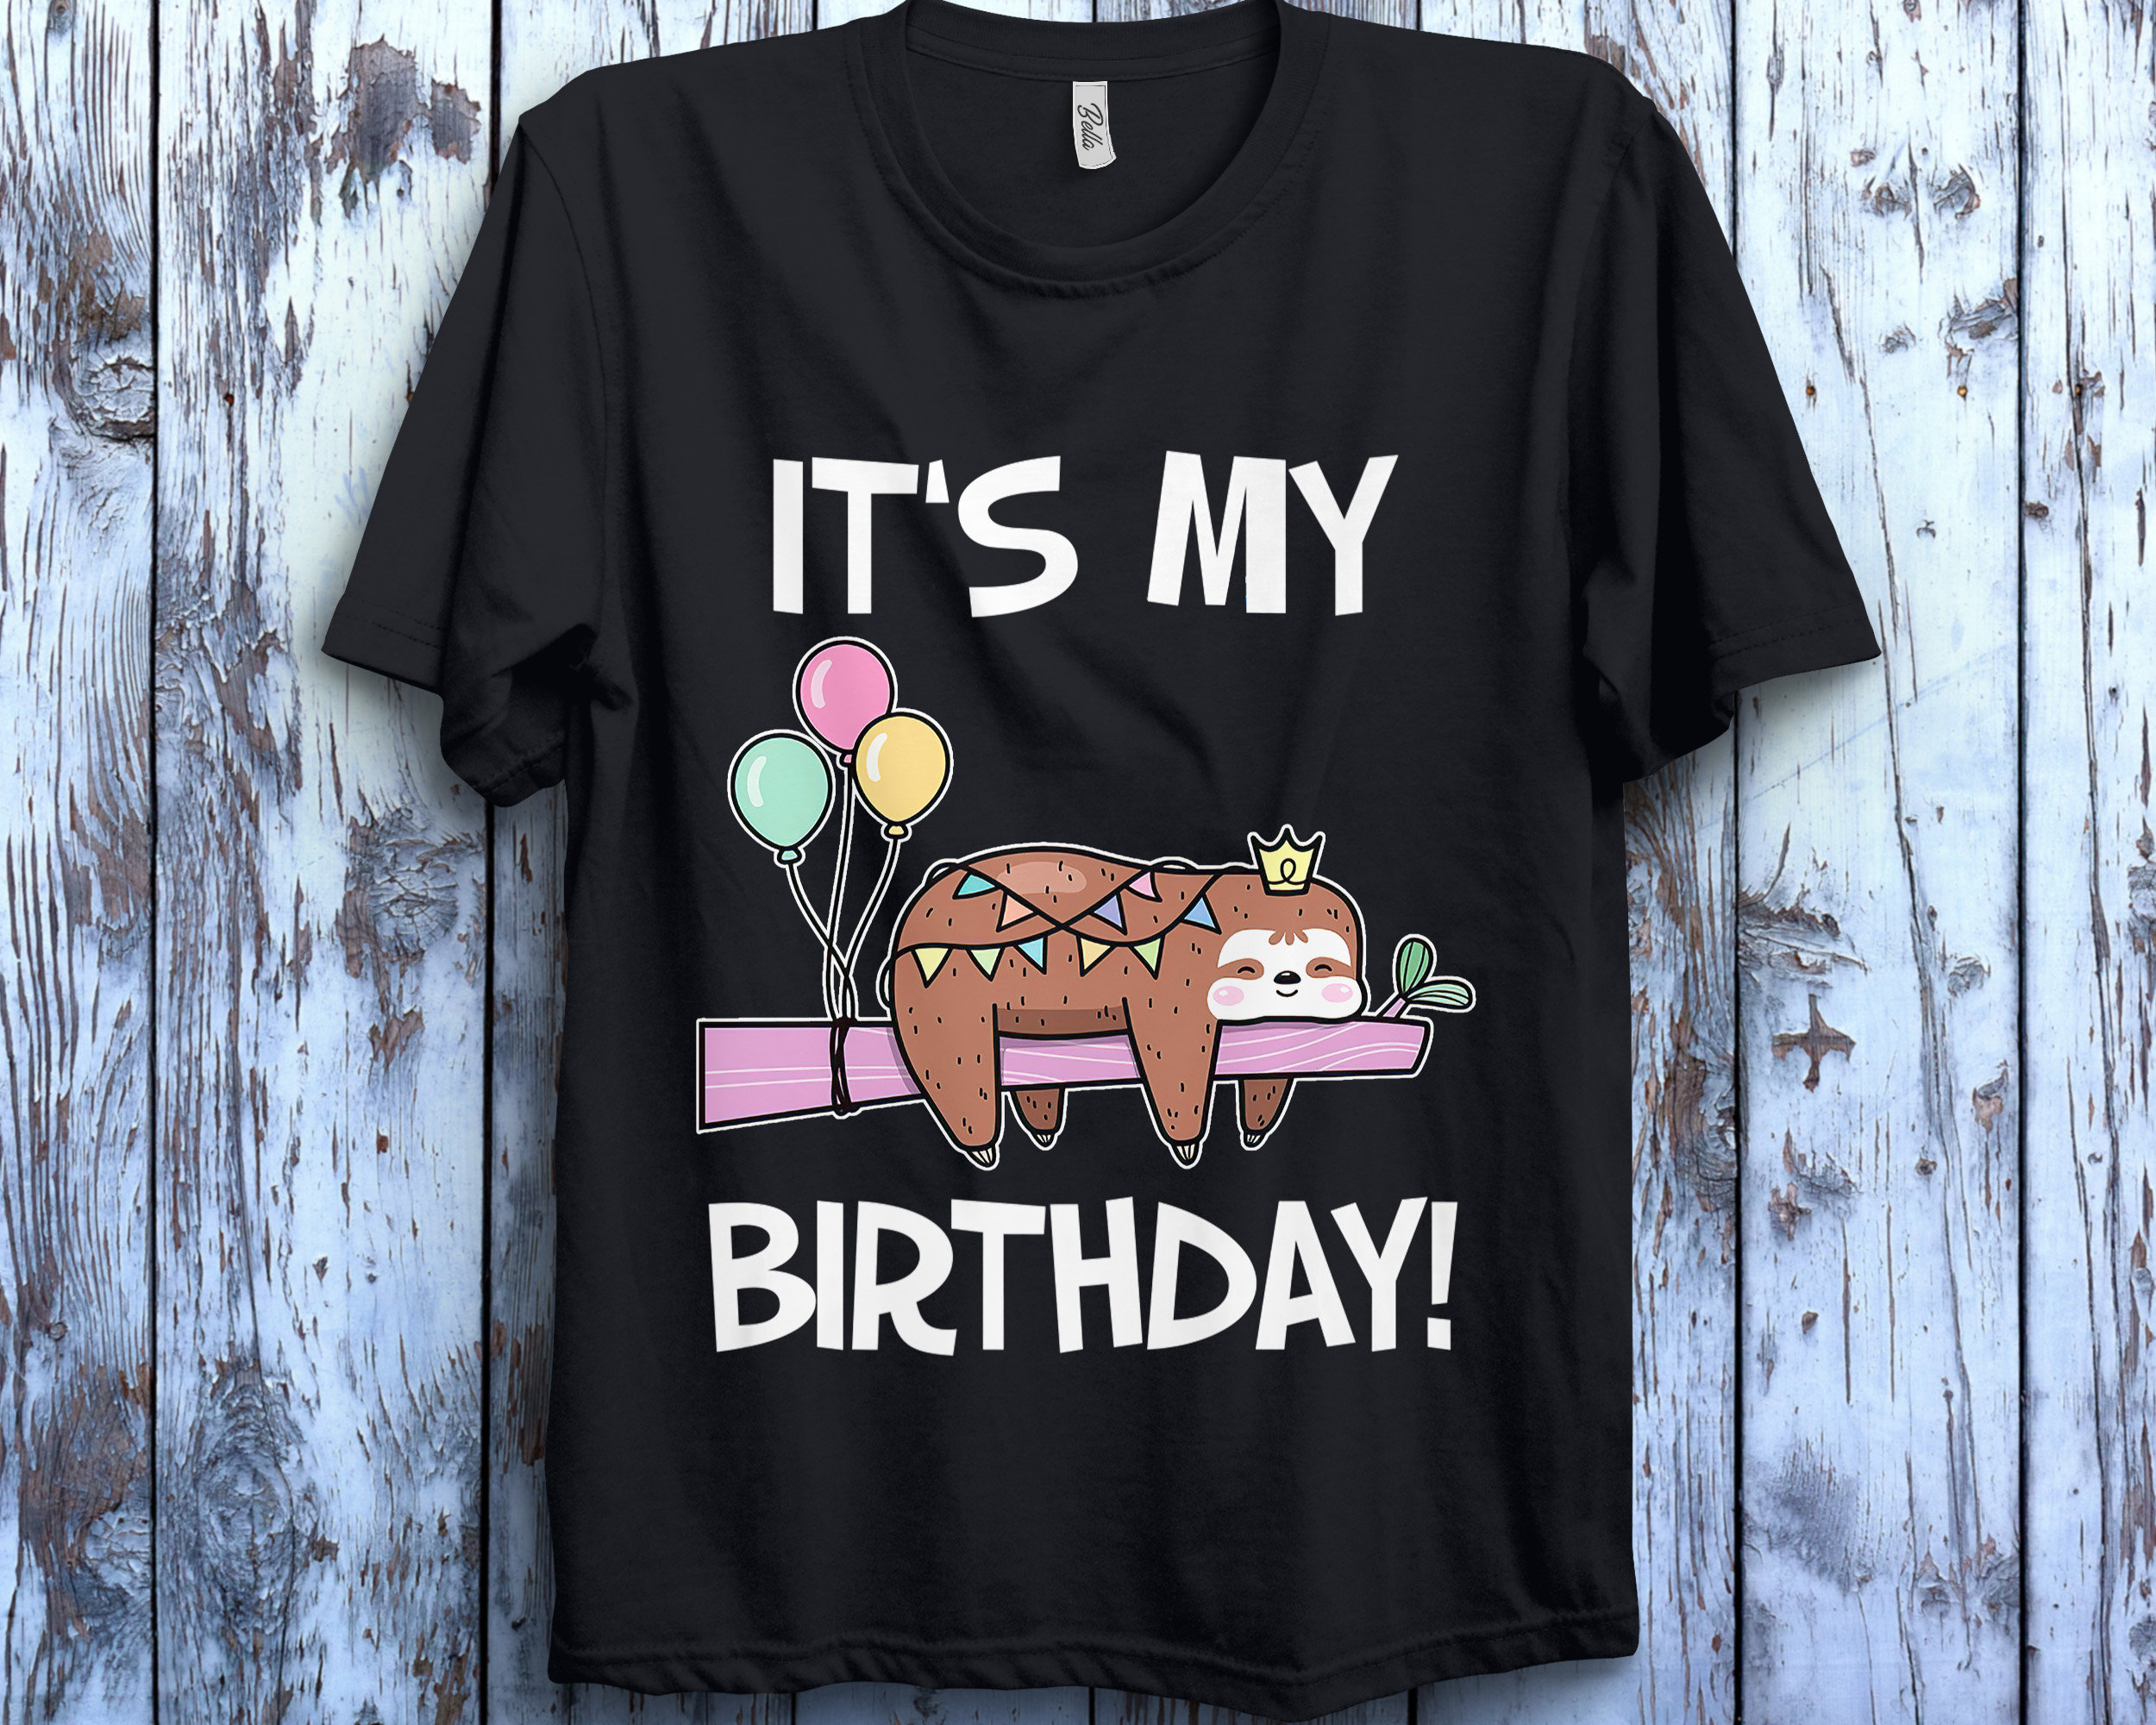 Discover Sloth It's My Birthday Funny Sloth Birthday Party T-shirt